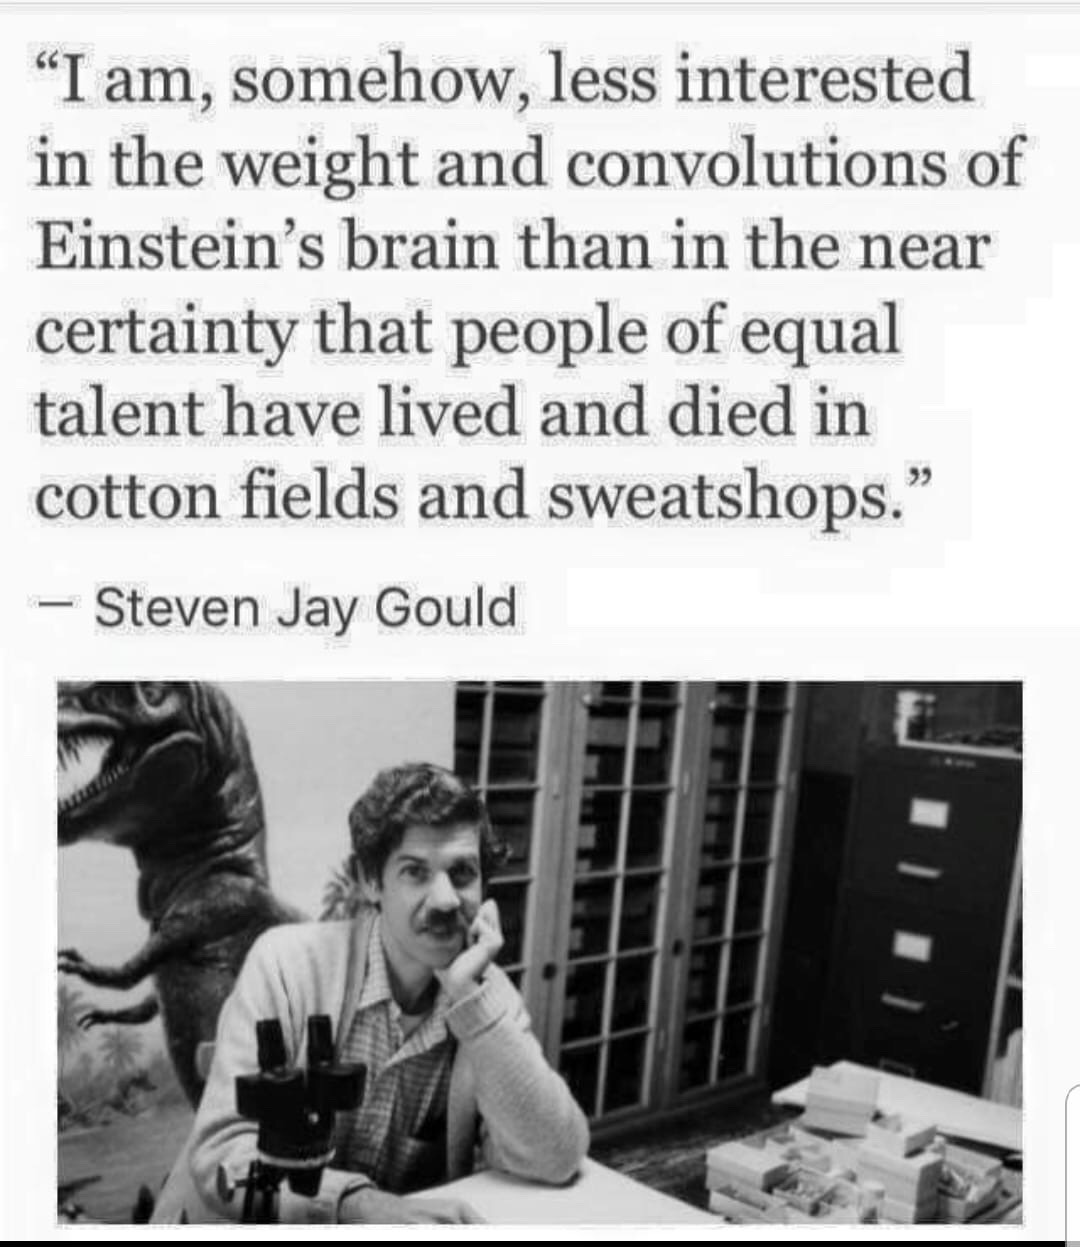 quotes - "I am, somehow, less interested in the weight and convolutions of Einstein's brain than in the near certainty that people of equal talent have lived and died in cotton fields and sweatshops." Steven Jay Gould